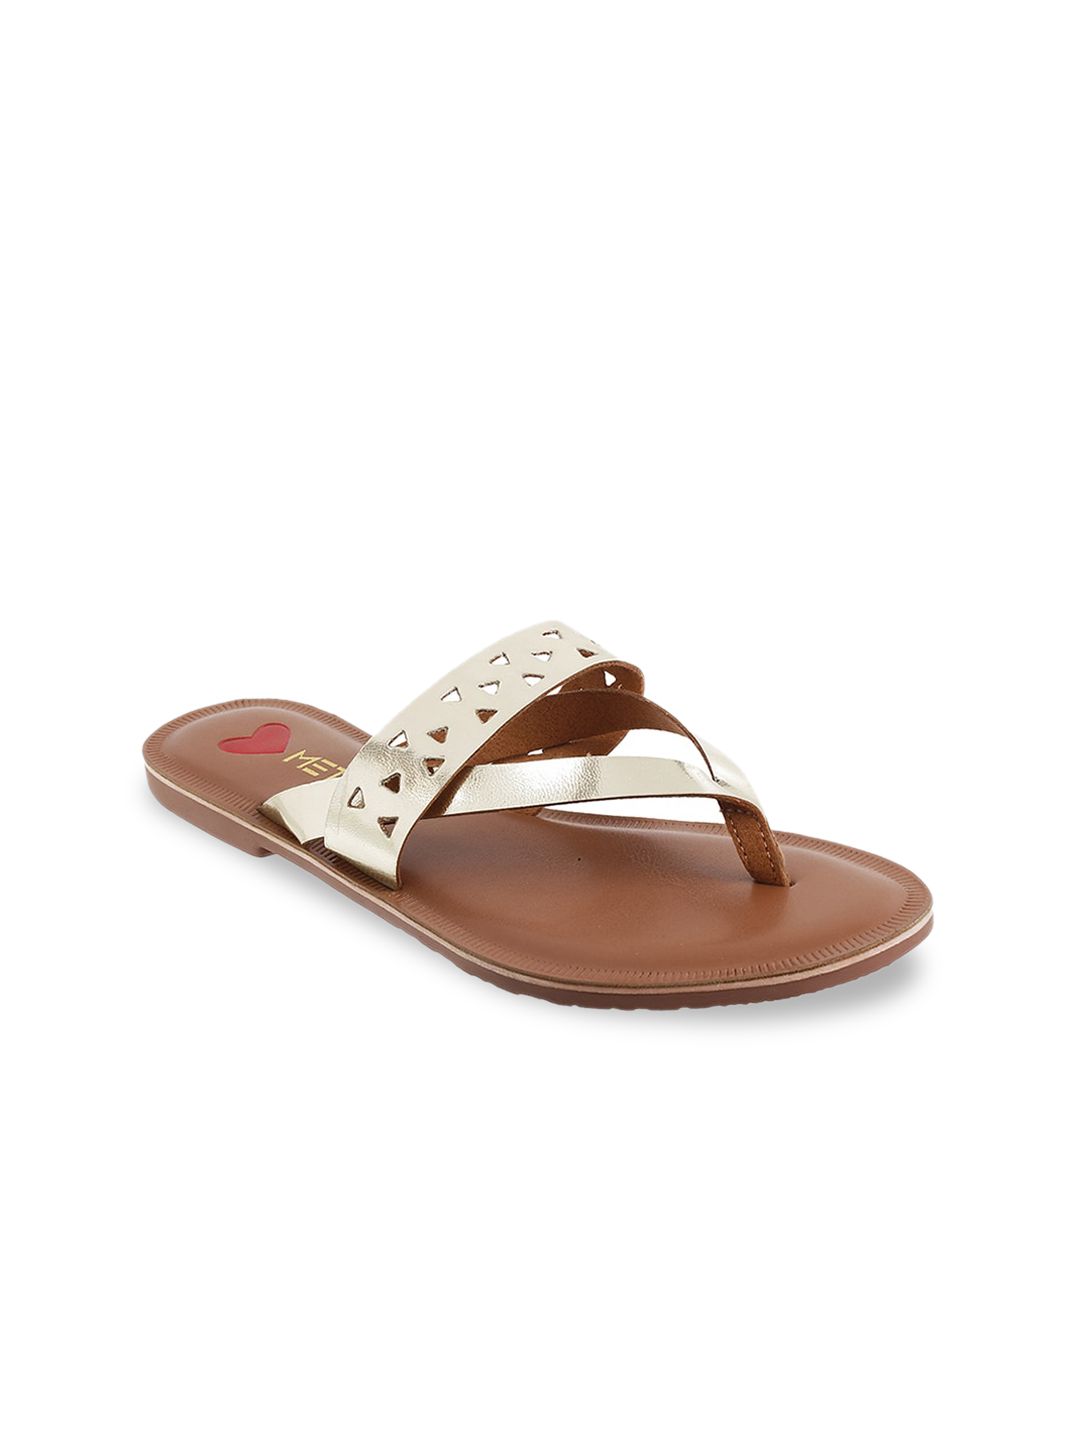 Metro Women Gold-Toned Solid T-Strap Flats Price in India